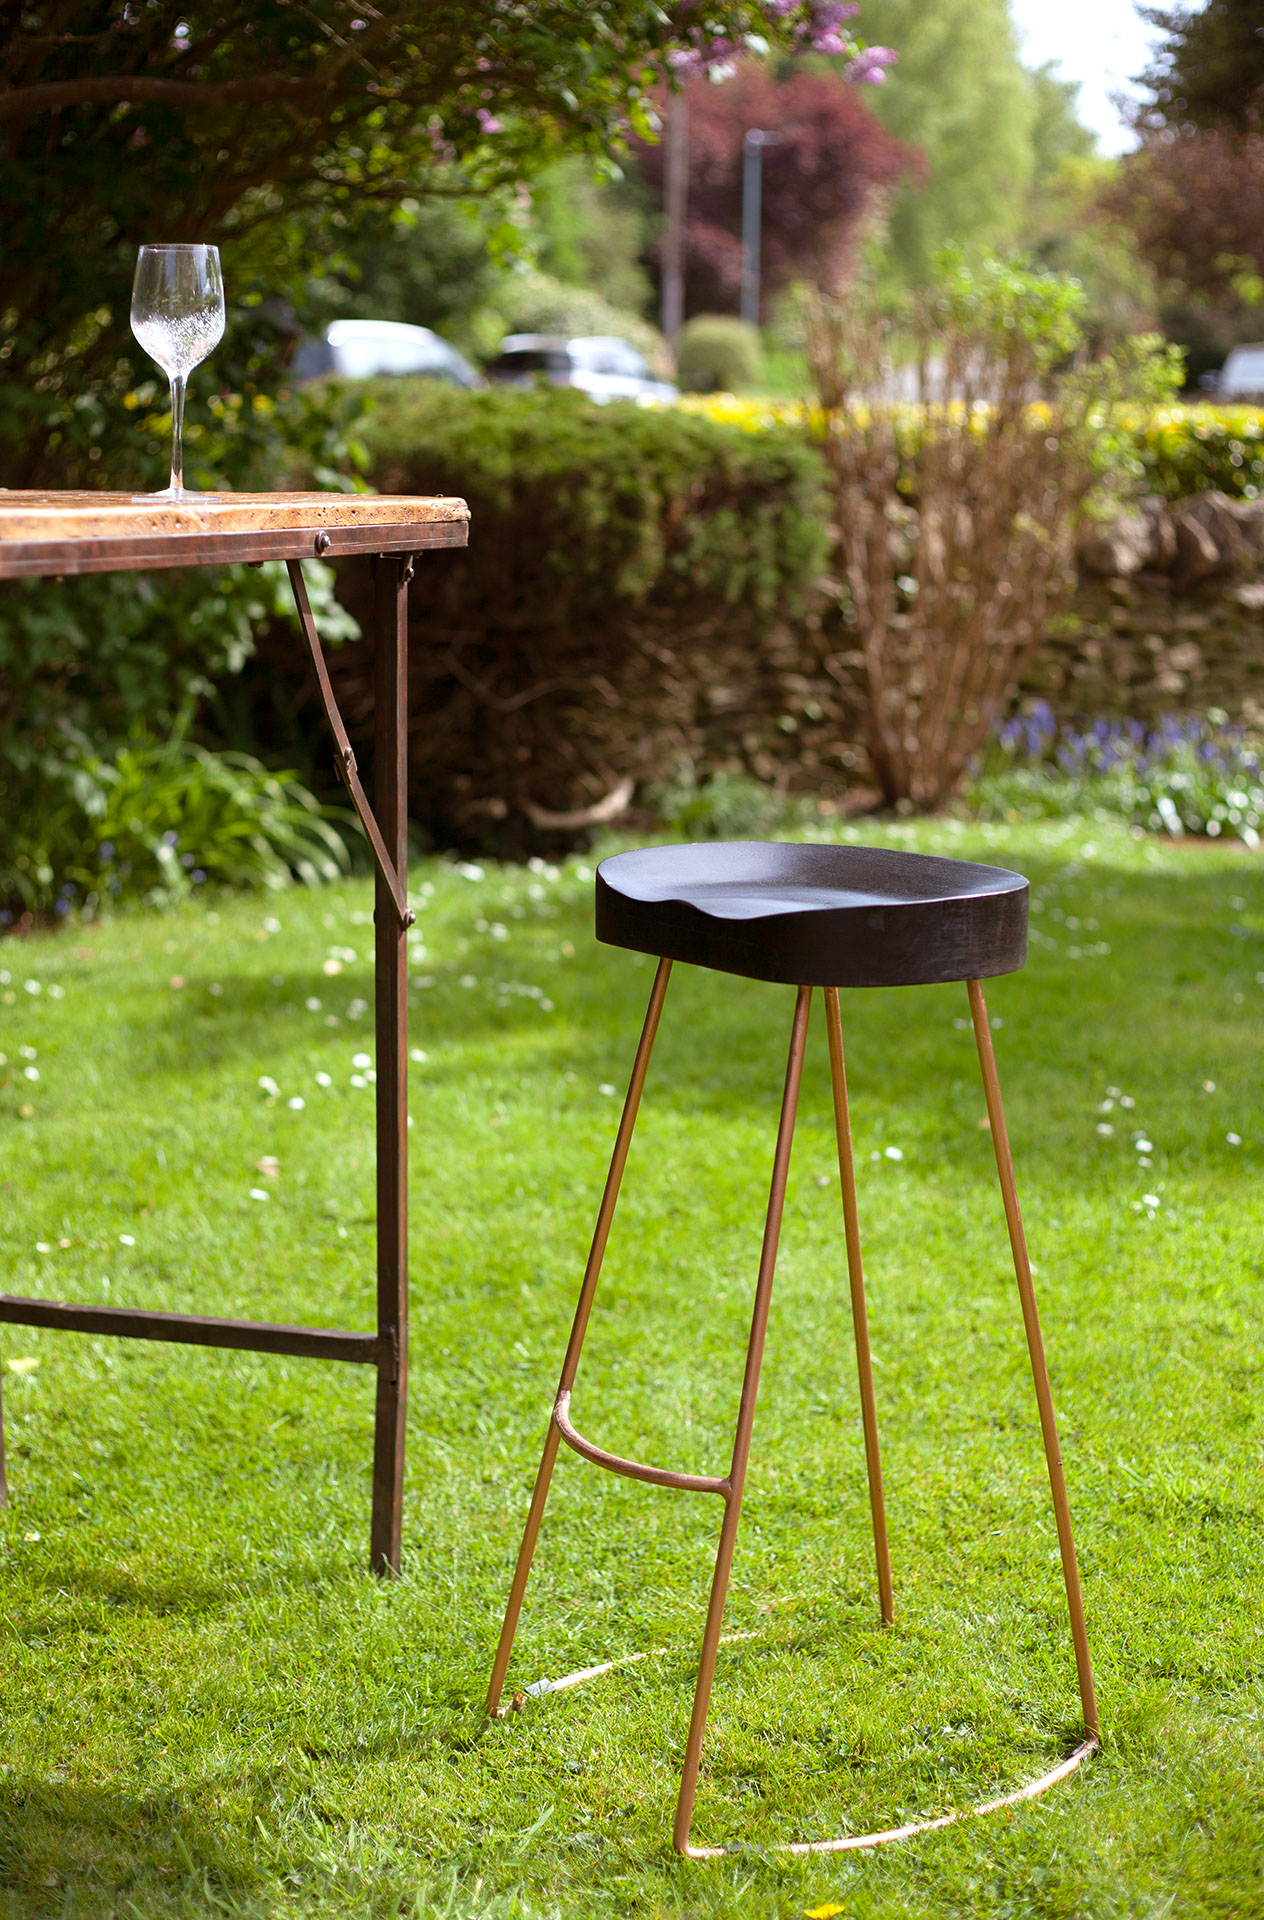 2 x Tall Black Wood and Copper Stool: A gorgeous high bar stool with an ergonomic seat.